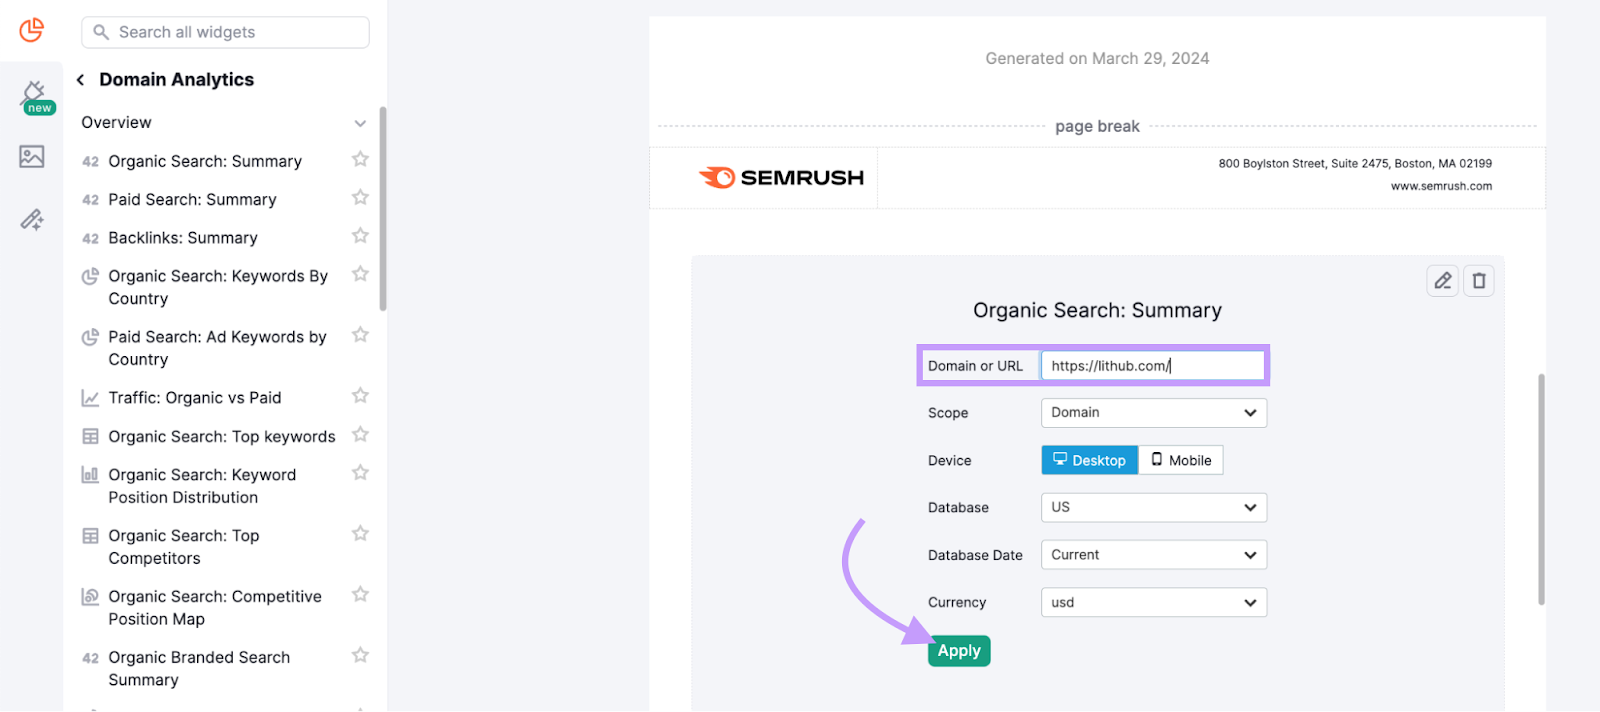 “Organic Search: Summary” widget added to the report